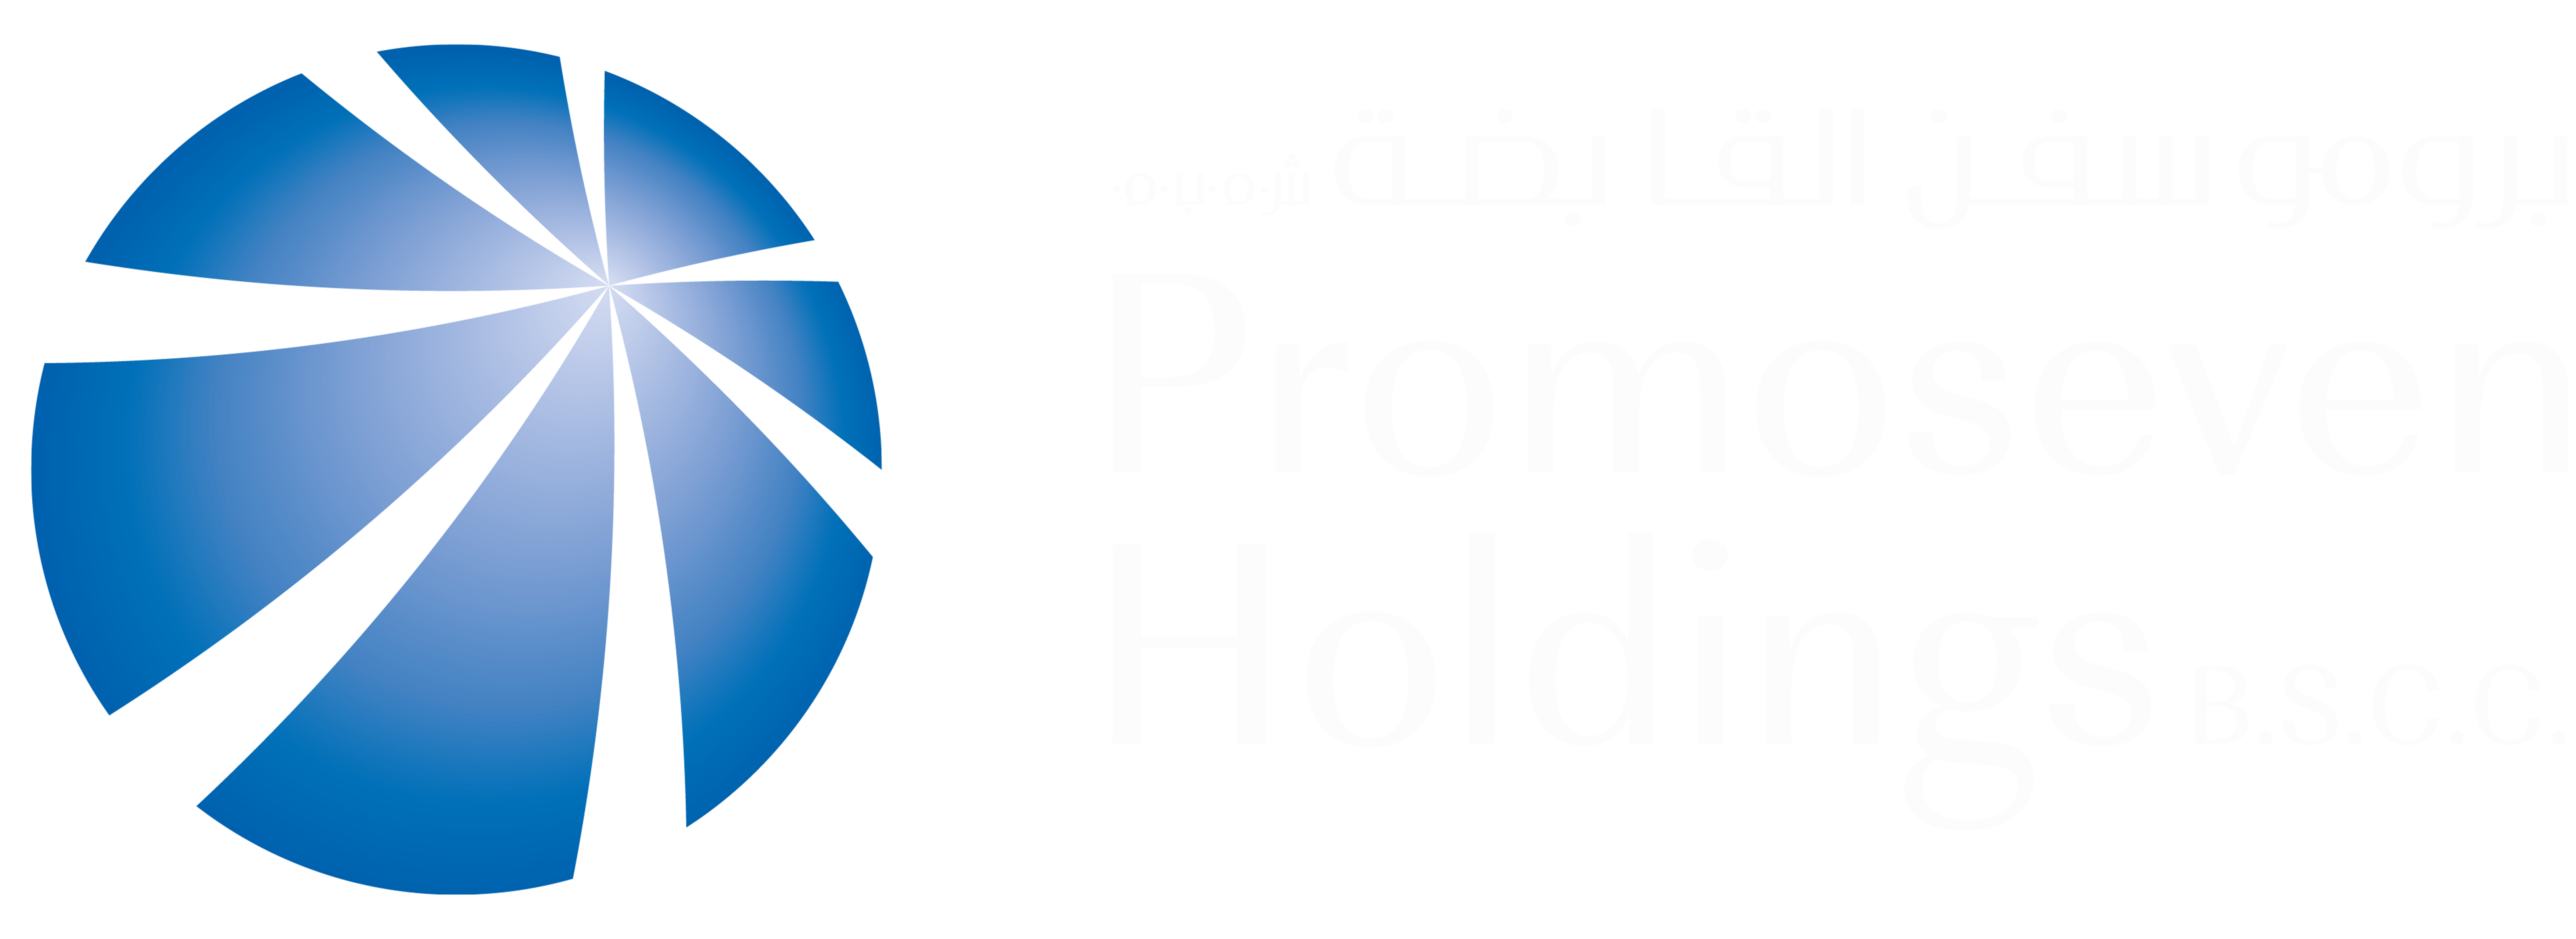 Promoseven Holdings